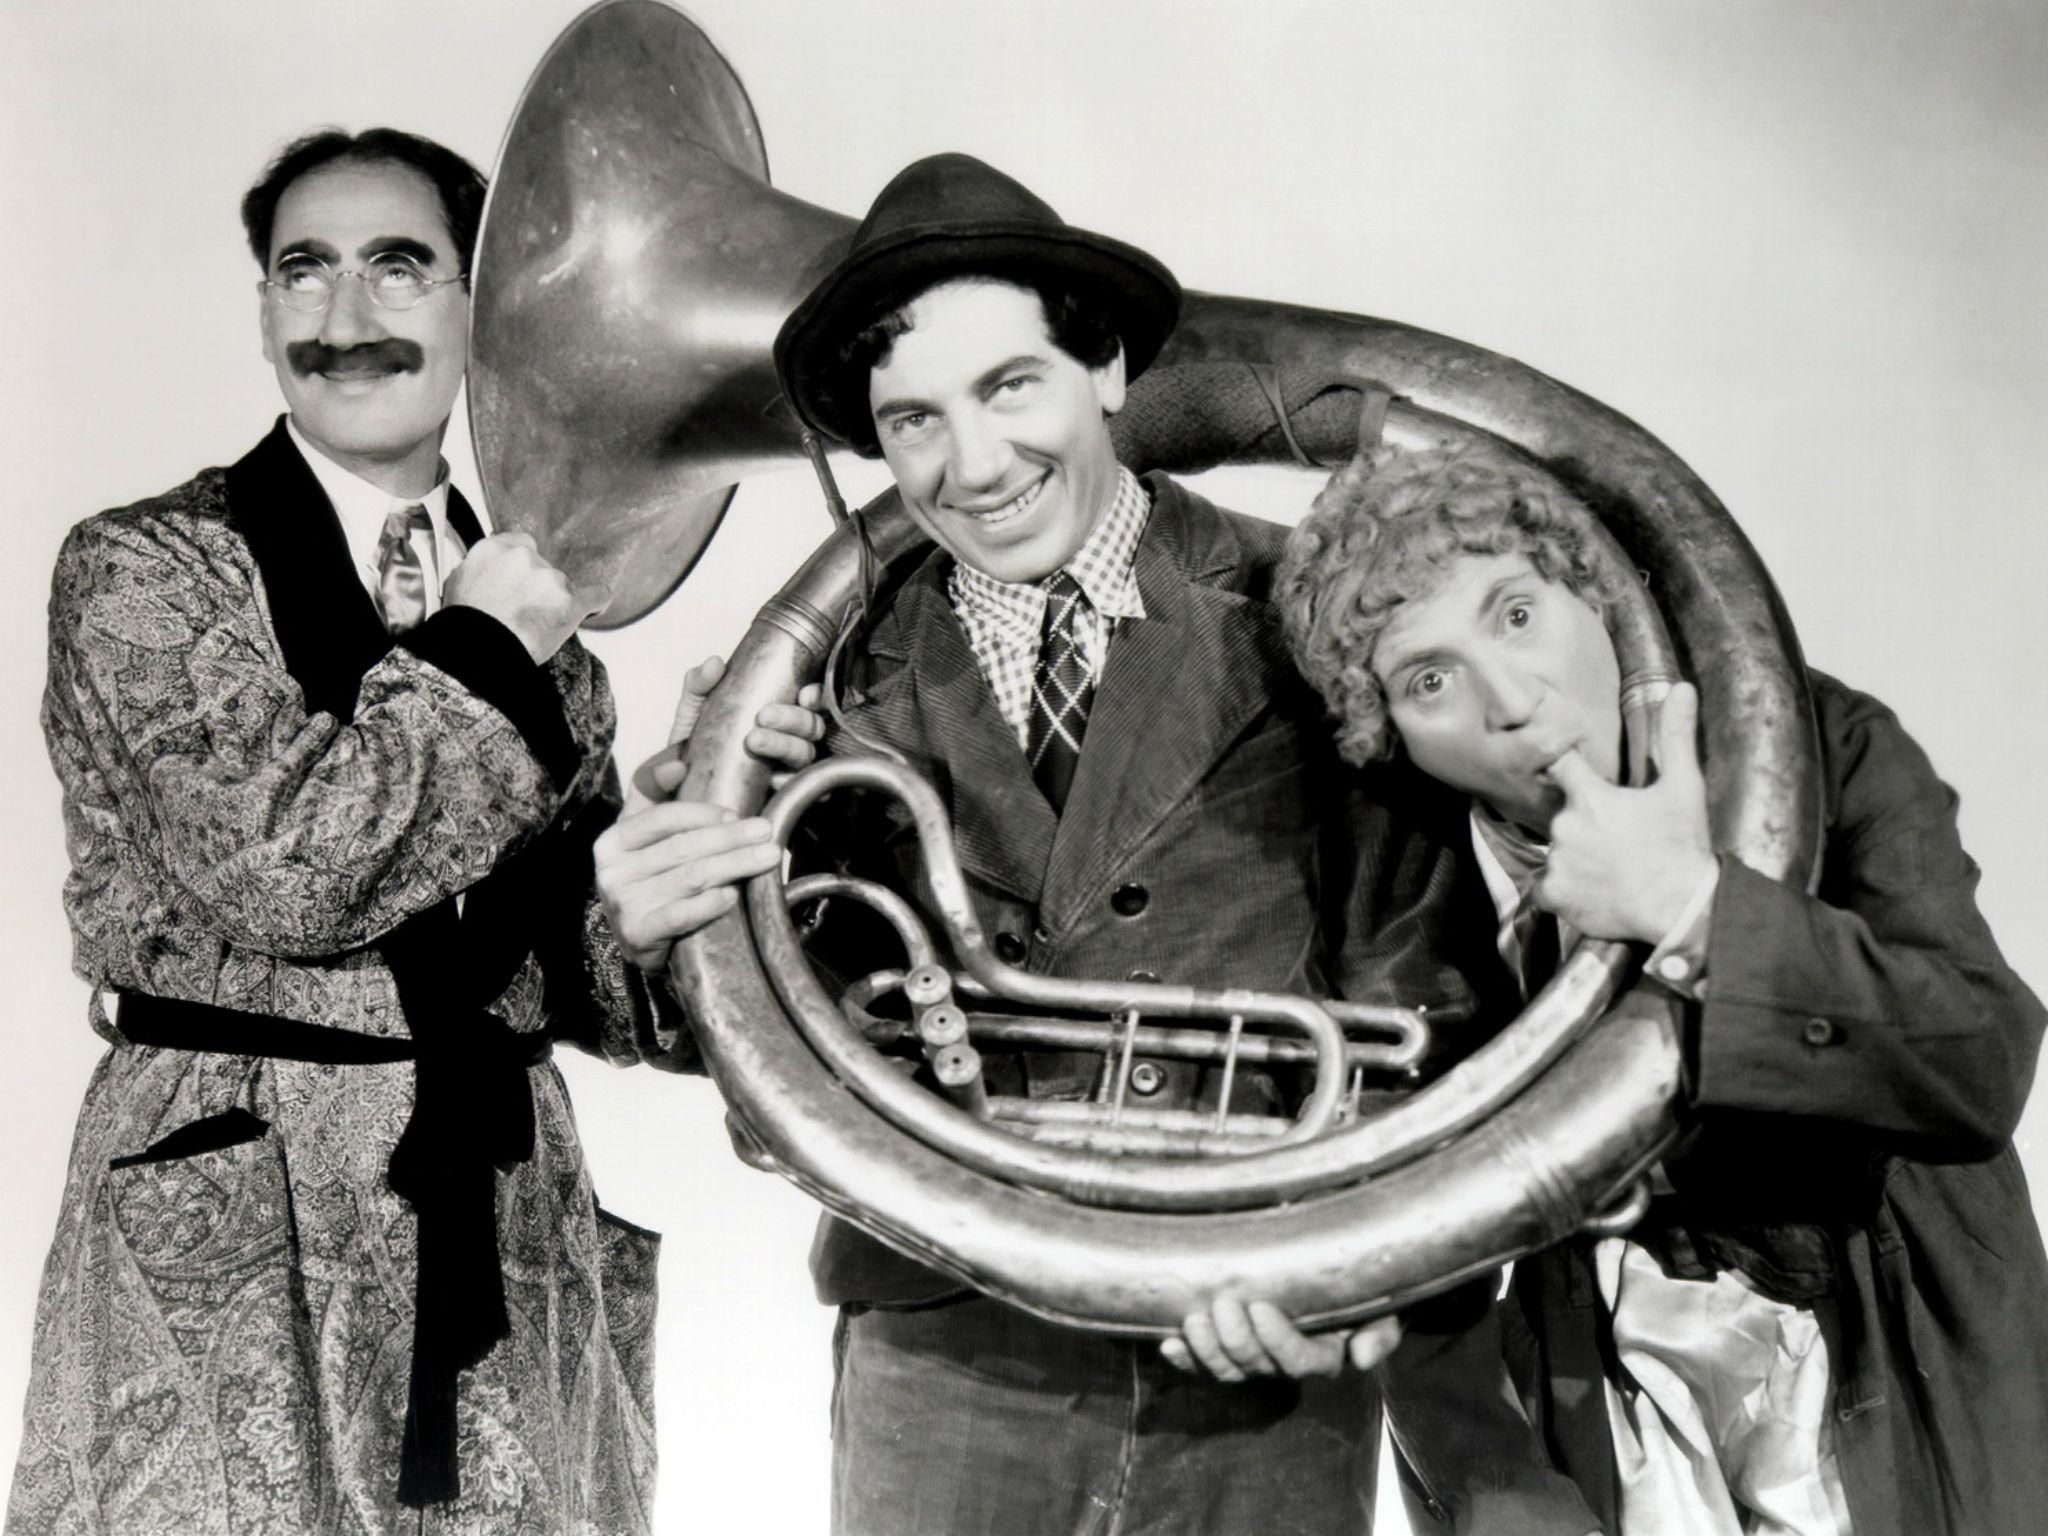 Brass act: Groucho, Chico and Harpo made 13 films between 1929 and 1949